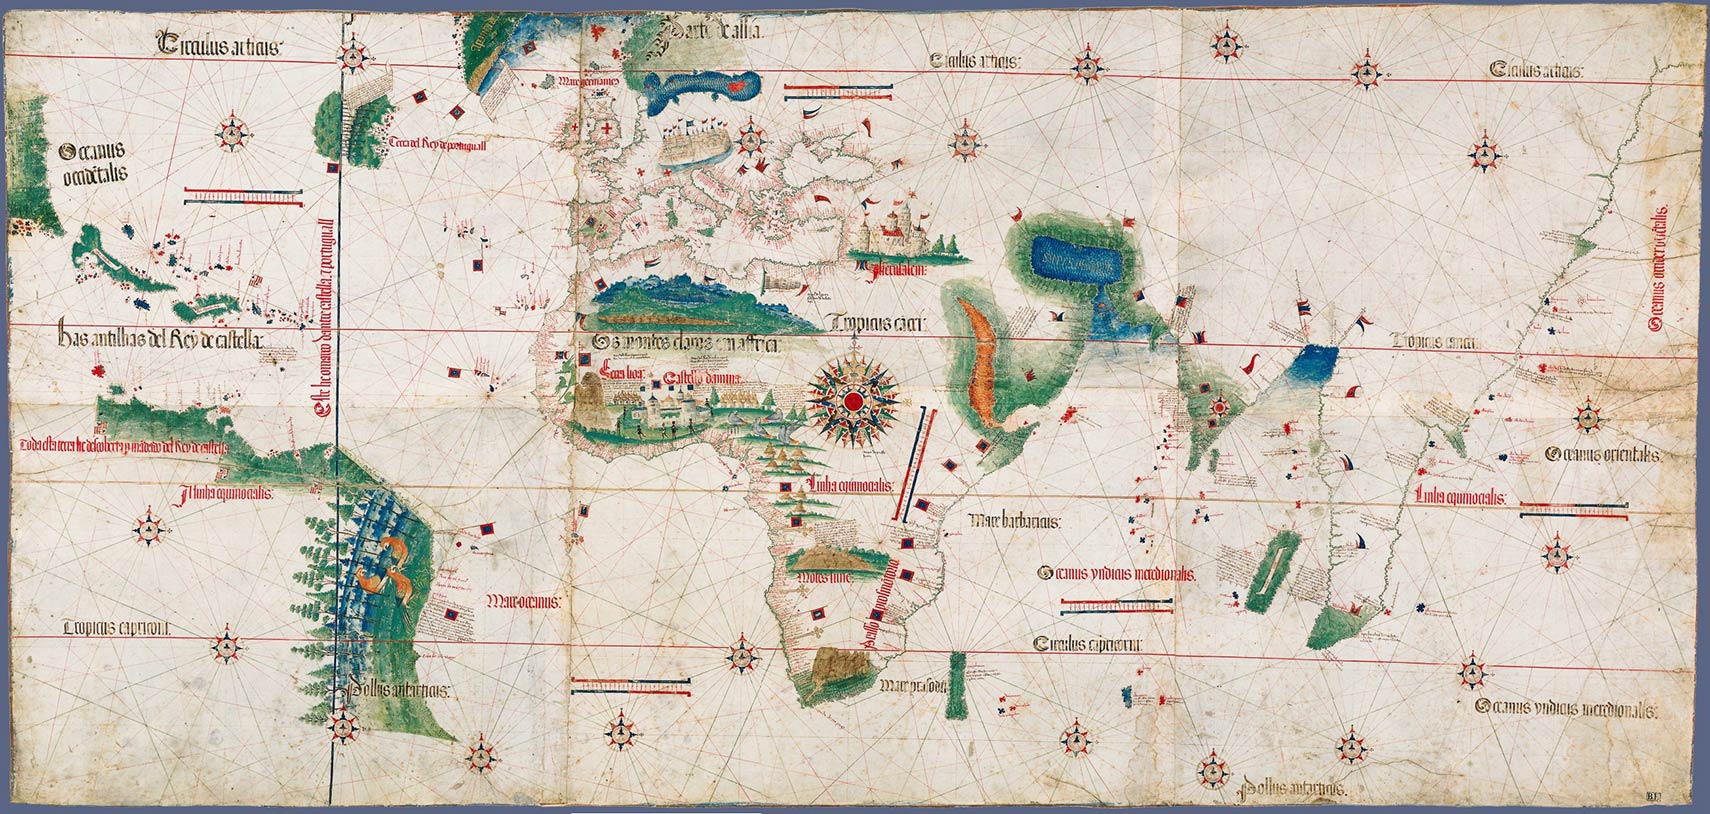 Portuguese world map showing Portuguese geographical discoveries